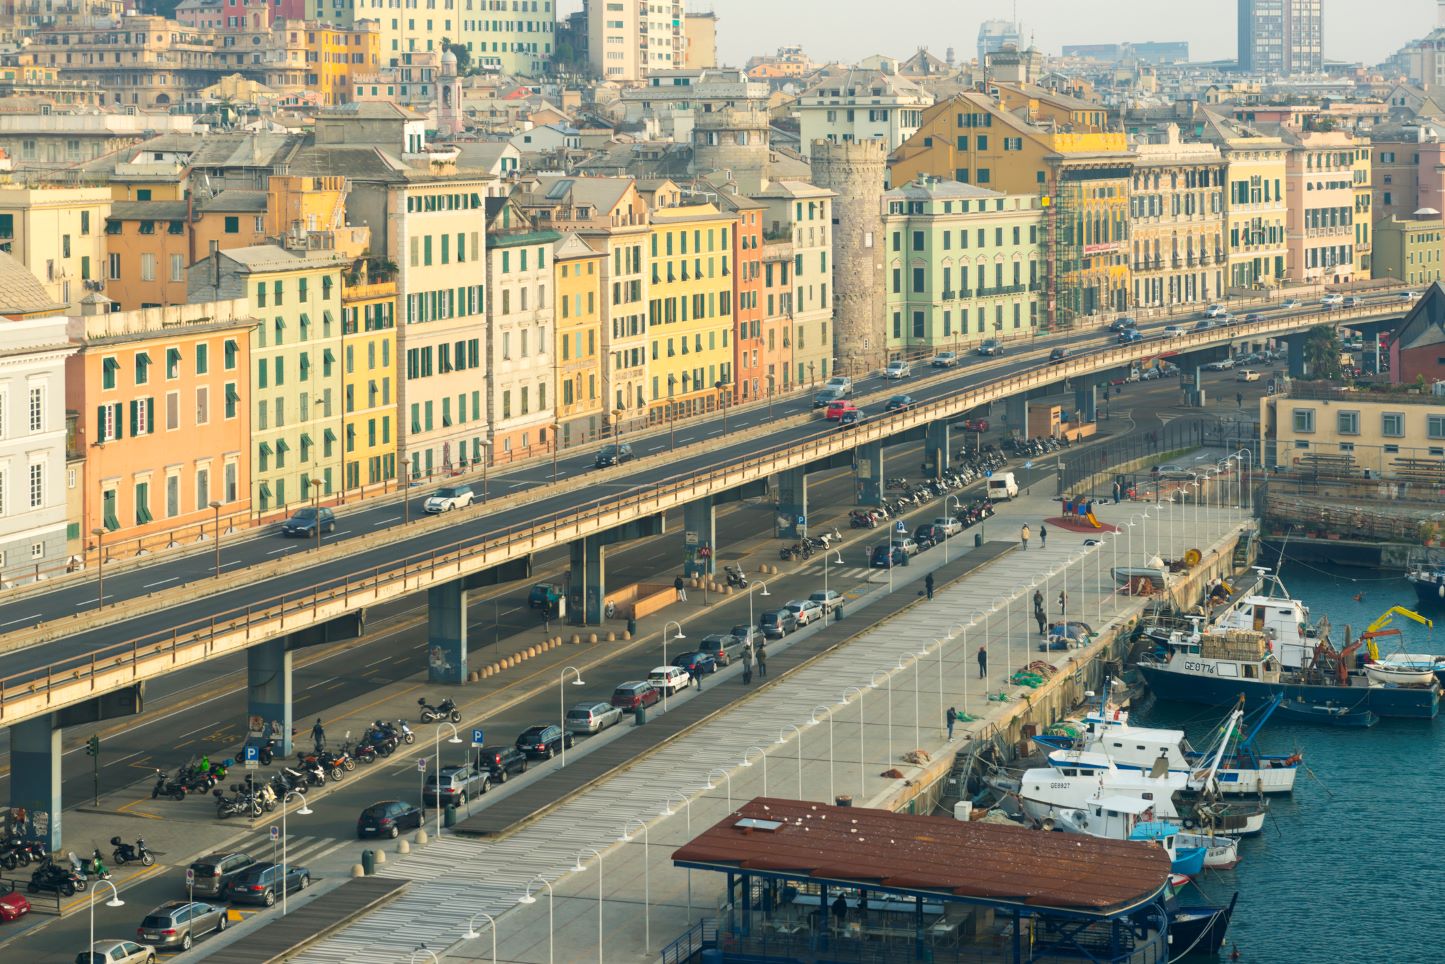 A causeway between buildings and the harbor in Genoa, Italy